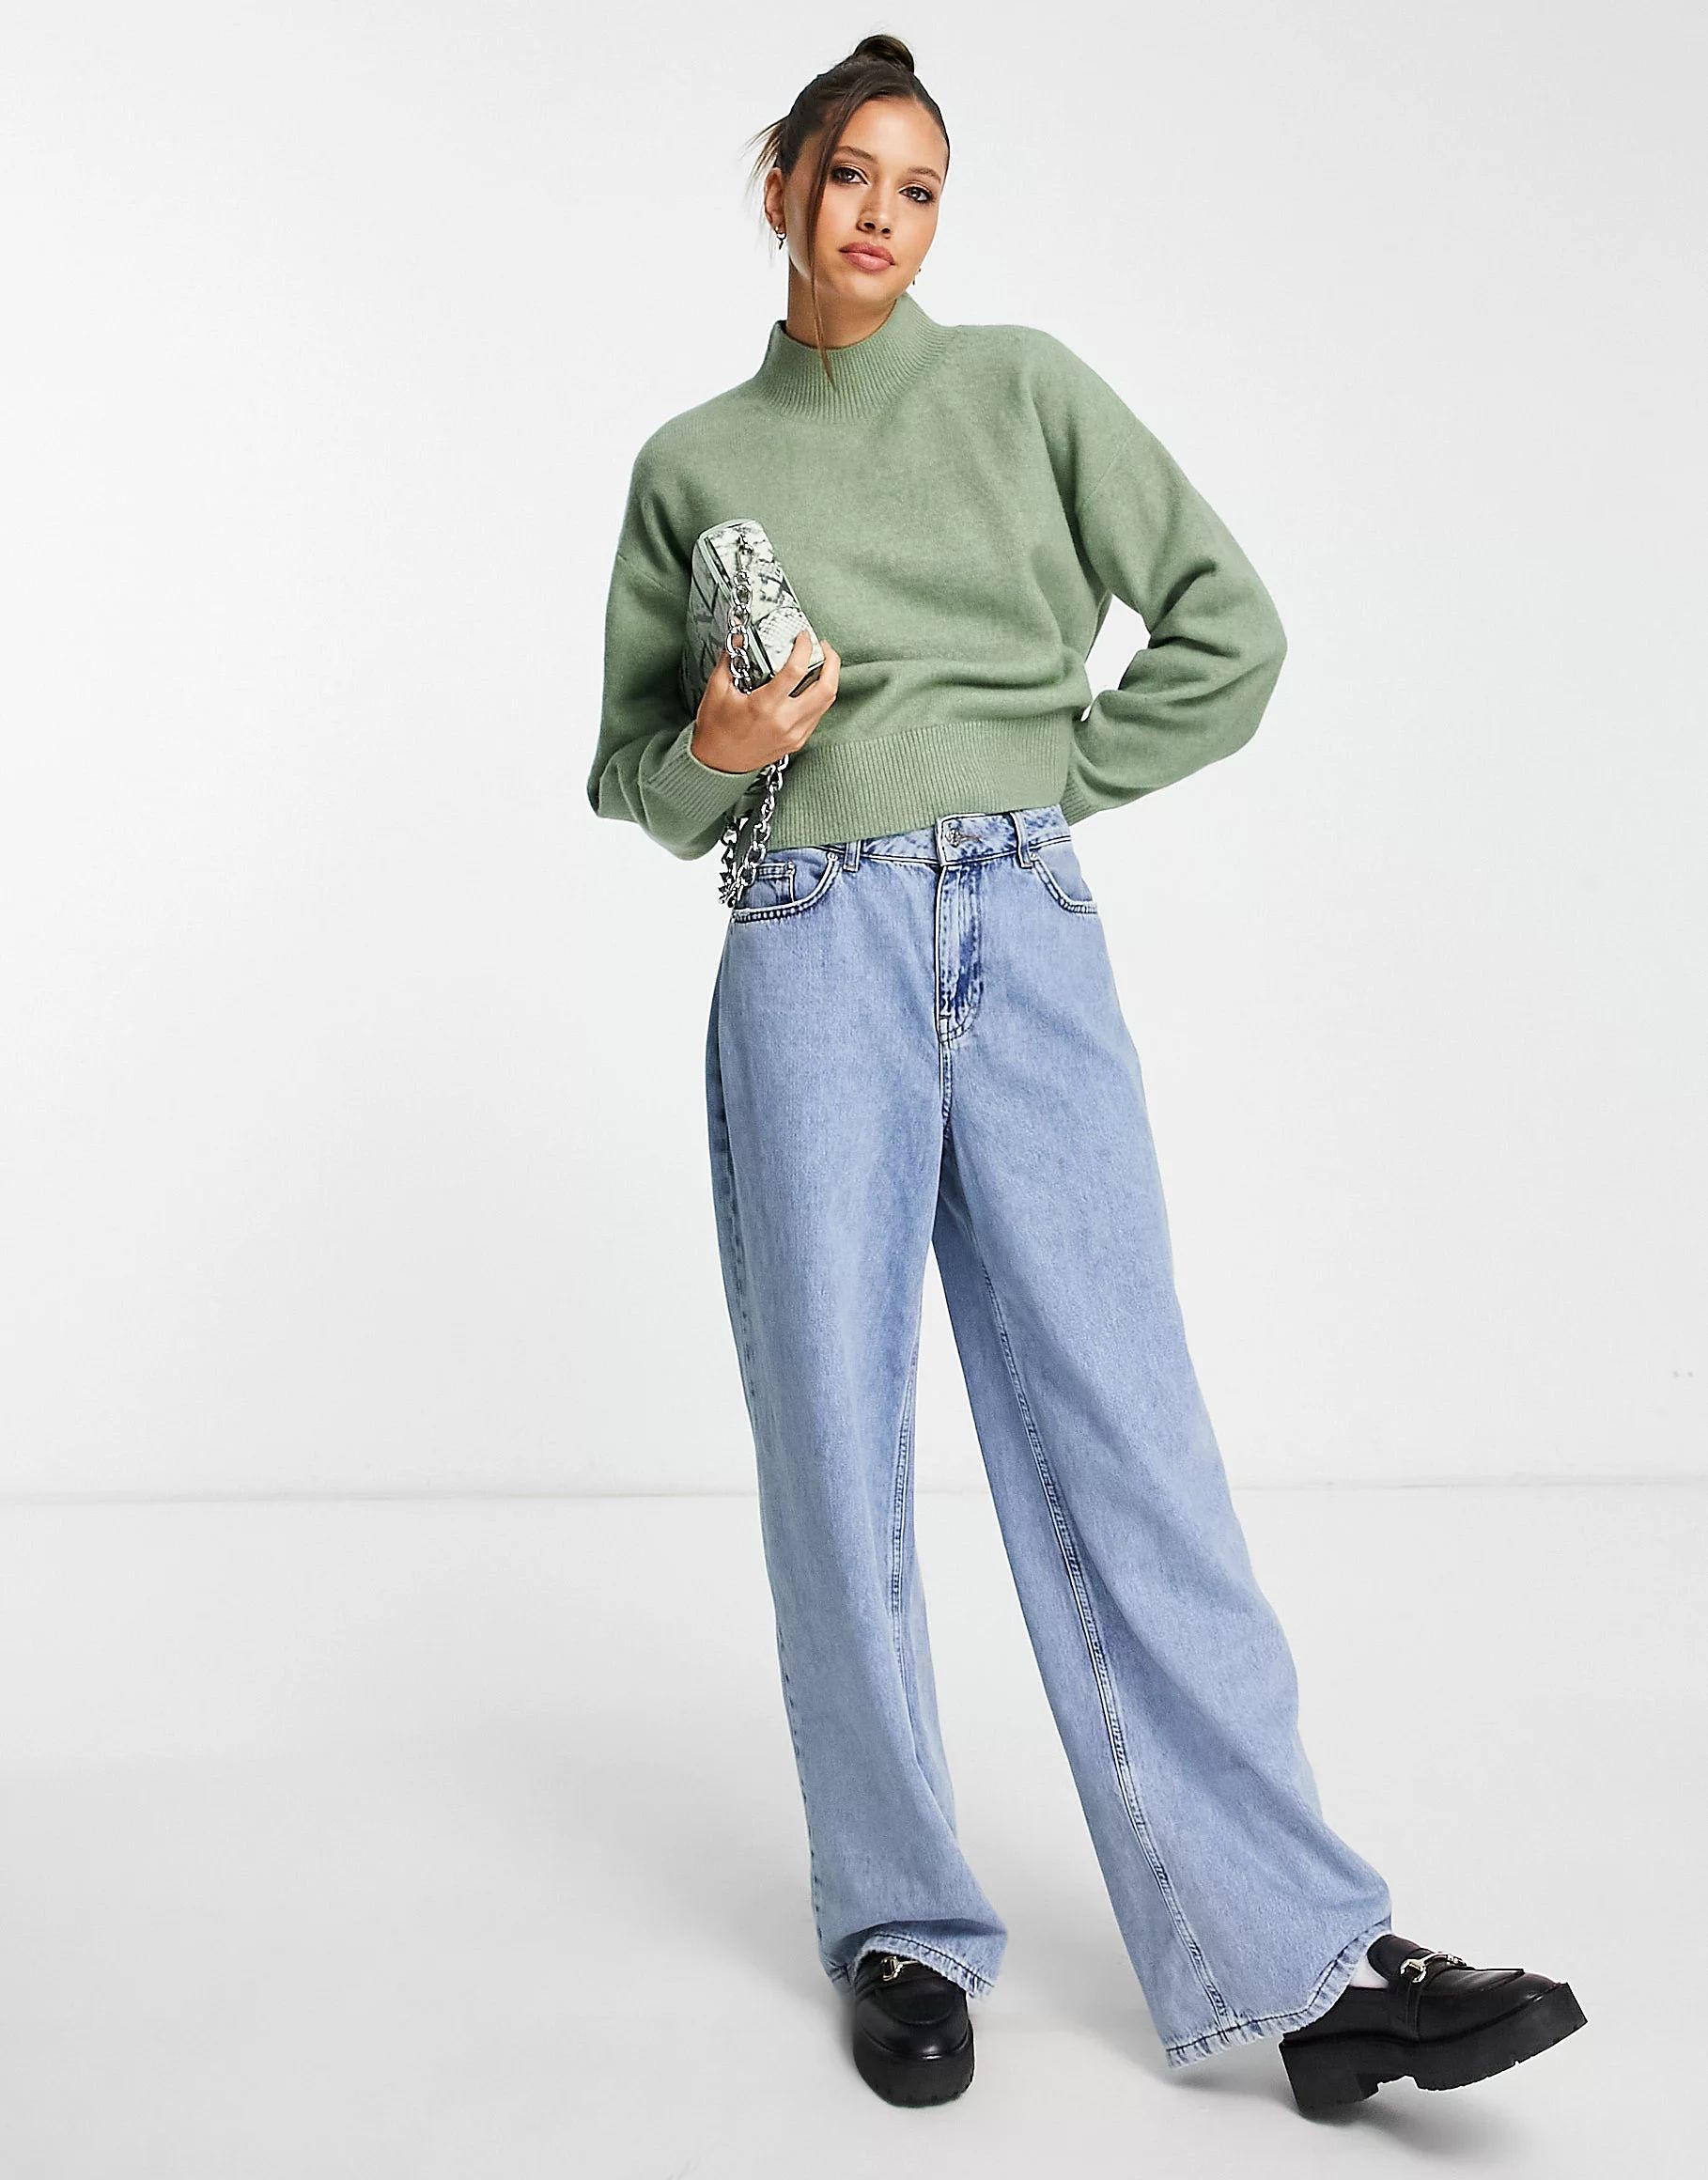 & Other Stories mock neck sweater in dusty green | ASOS (Global)